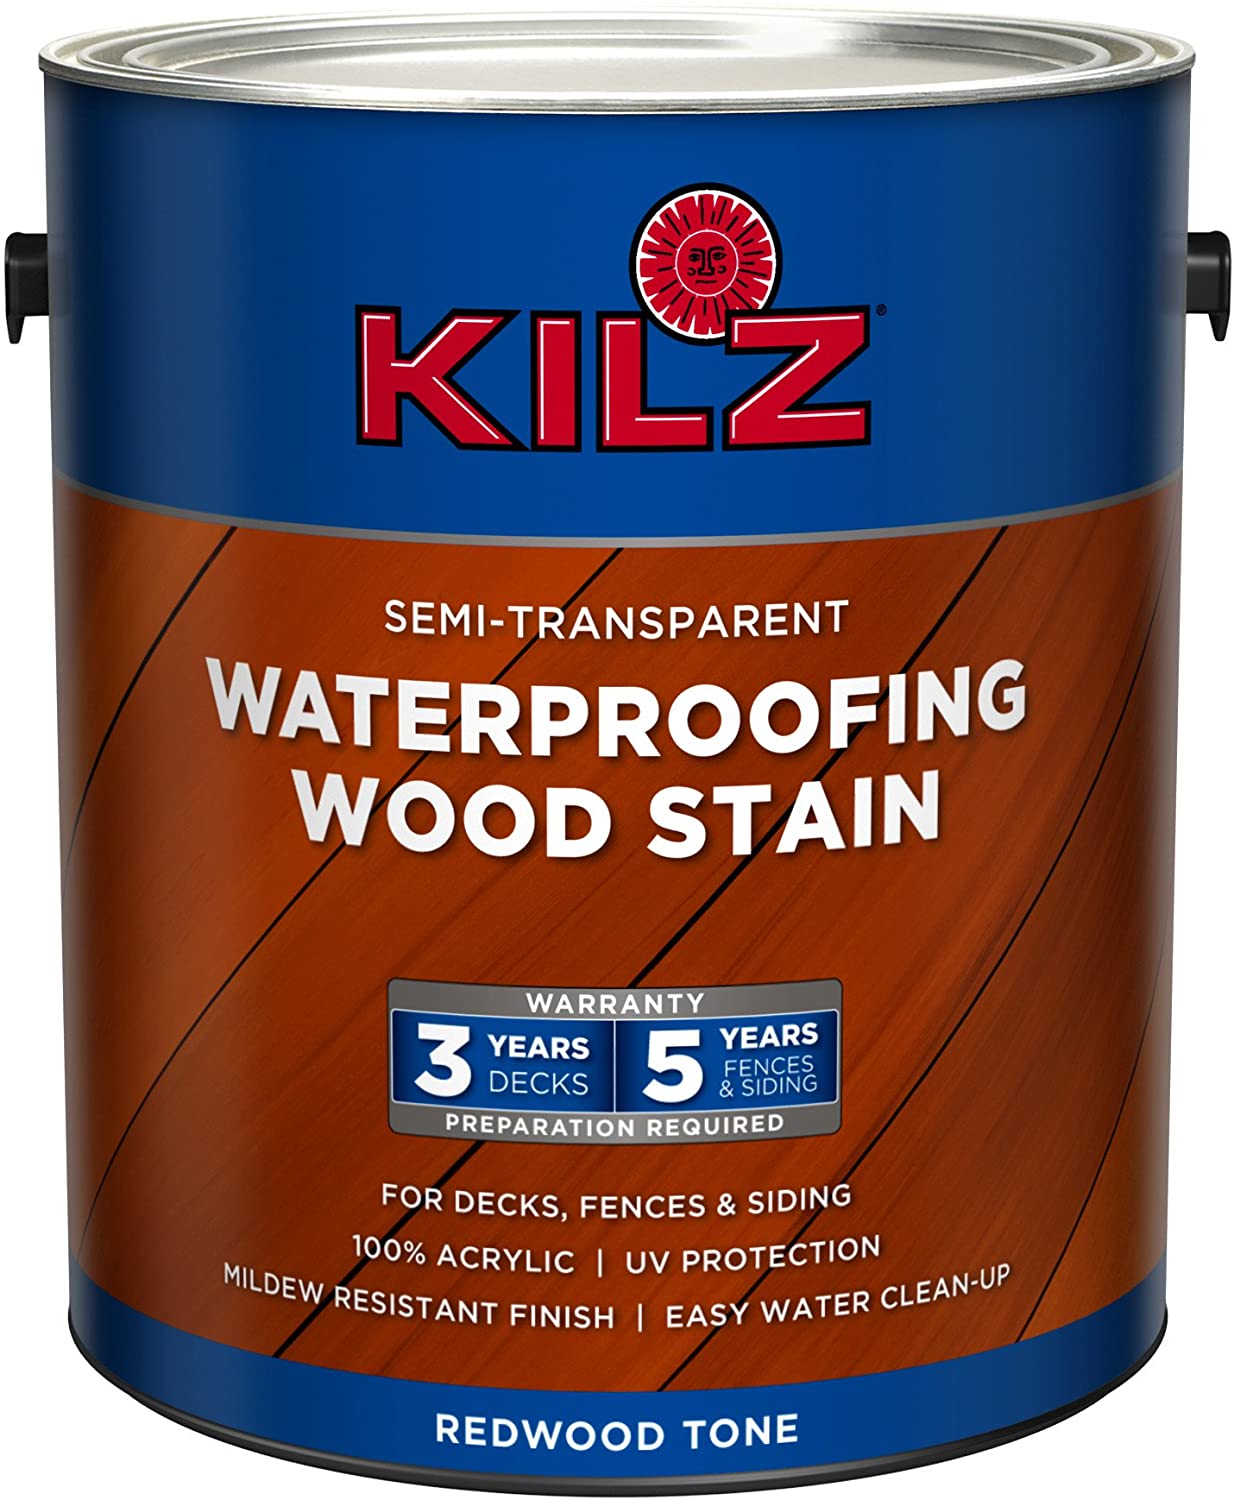 <strong>6. KILZ L832211 Exterior Waterproofing Wood Stain</strong>